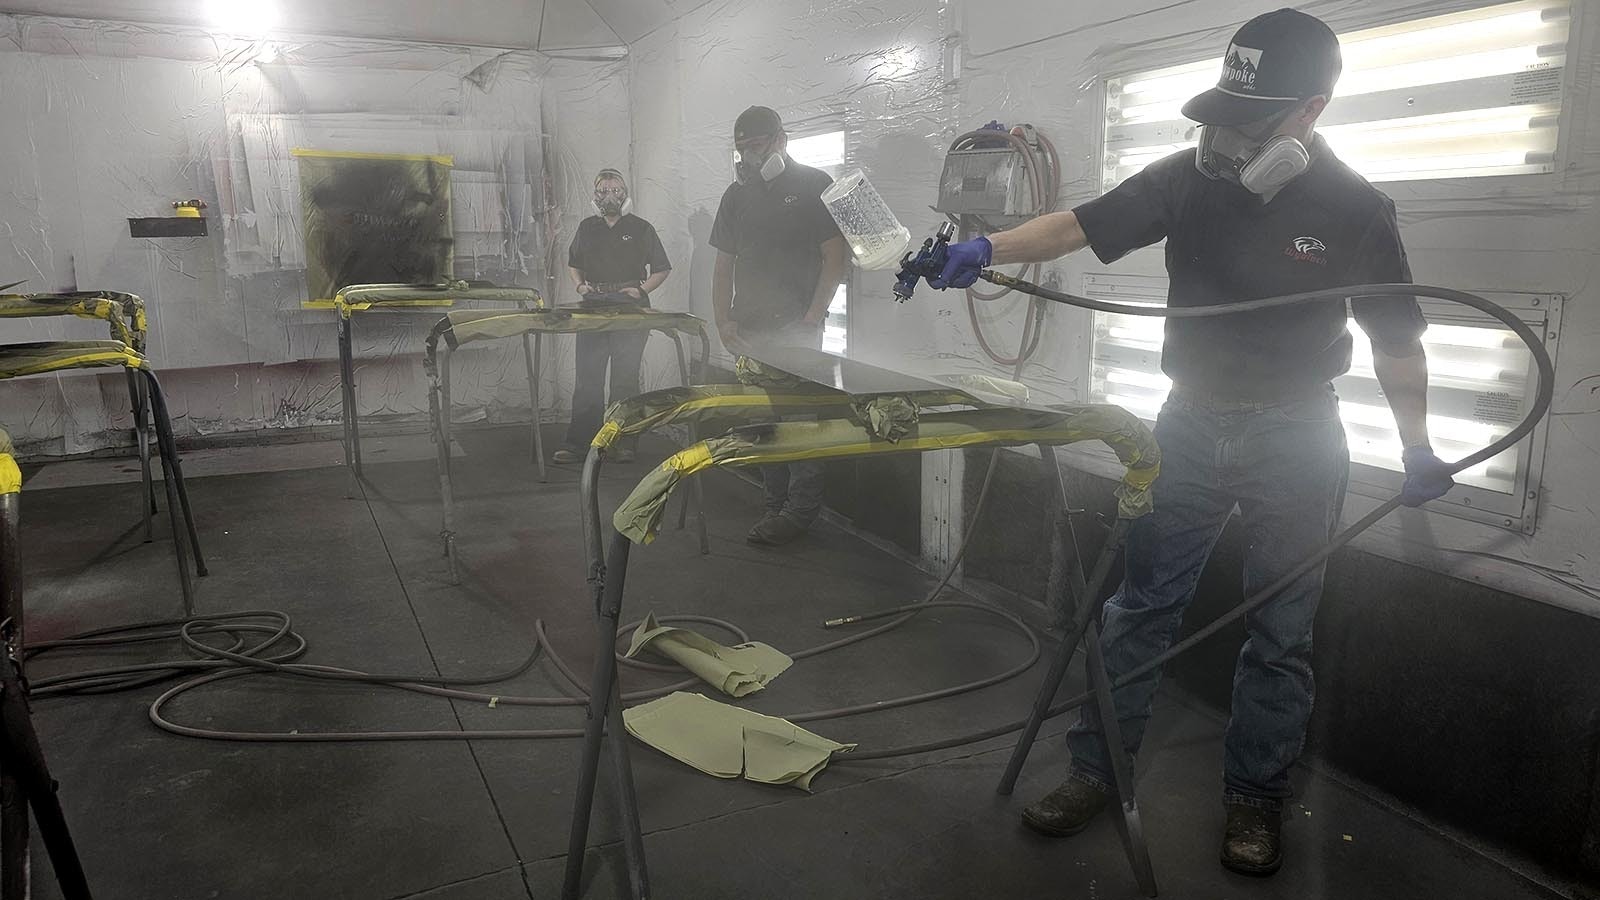 Students learn how to do custom finish work in one of the paint rooms at WyoTech.